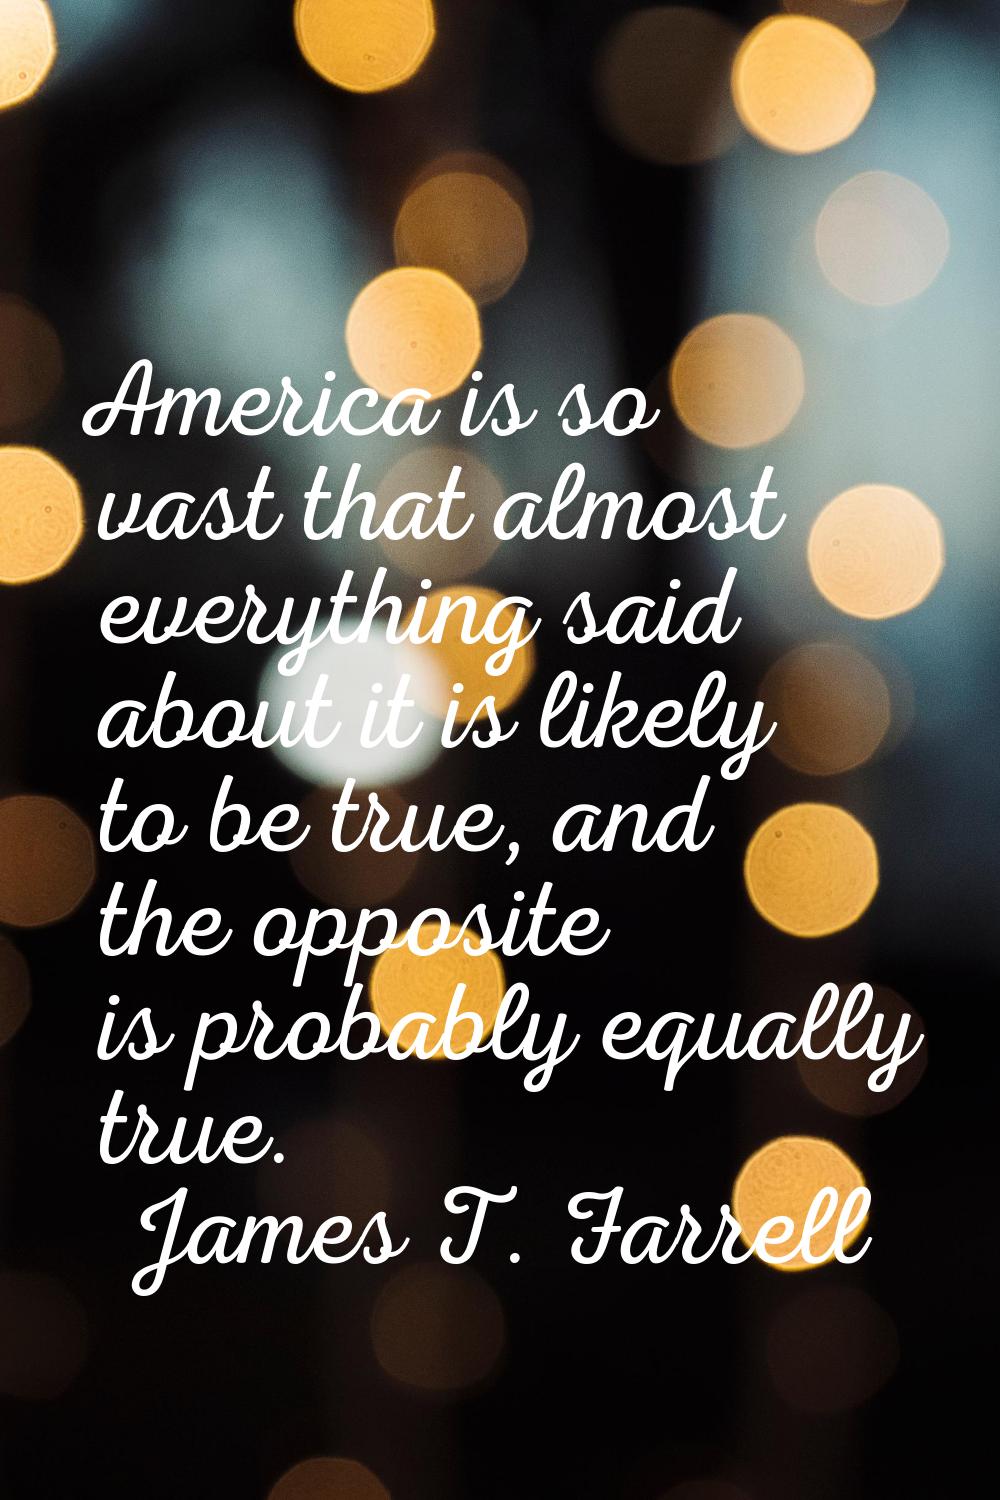 America is so vast that almost everything said about it is likely to be true, and the opposite is p